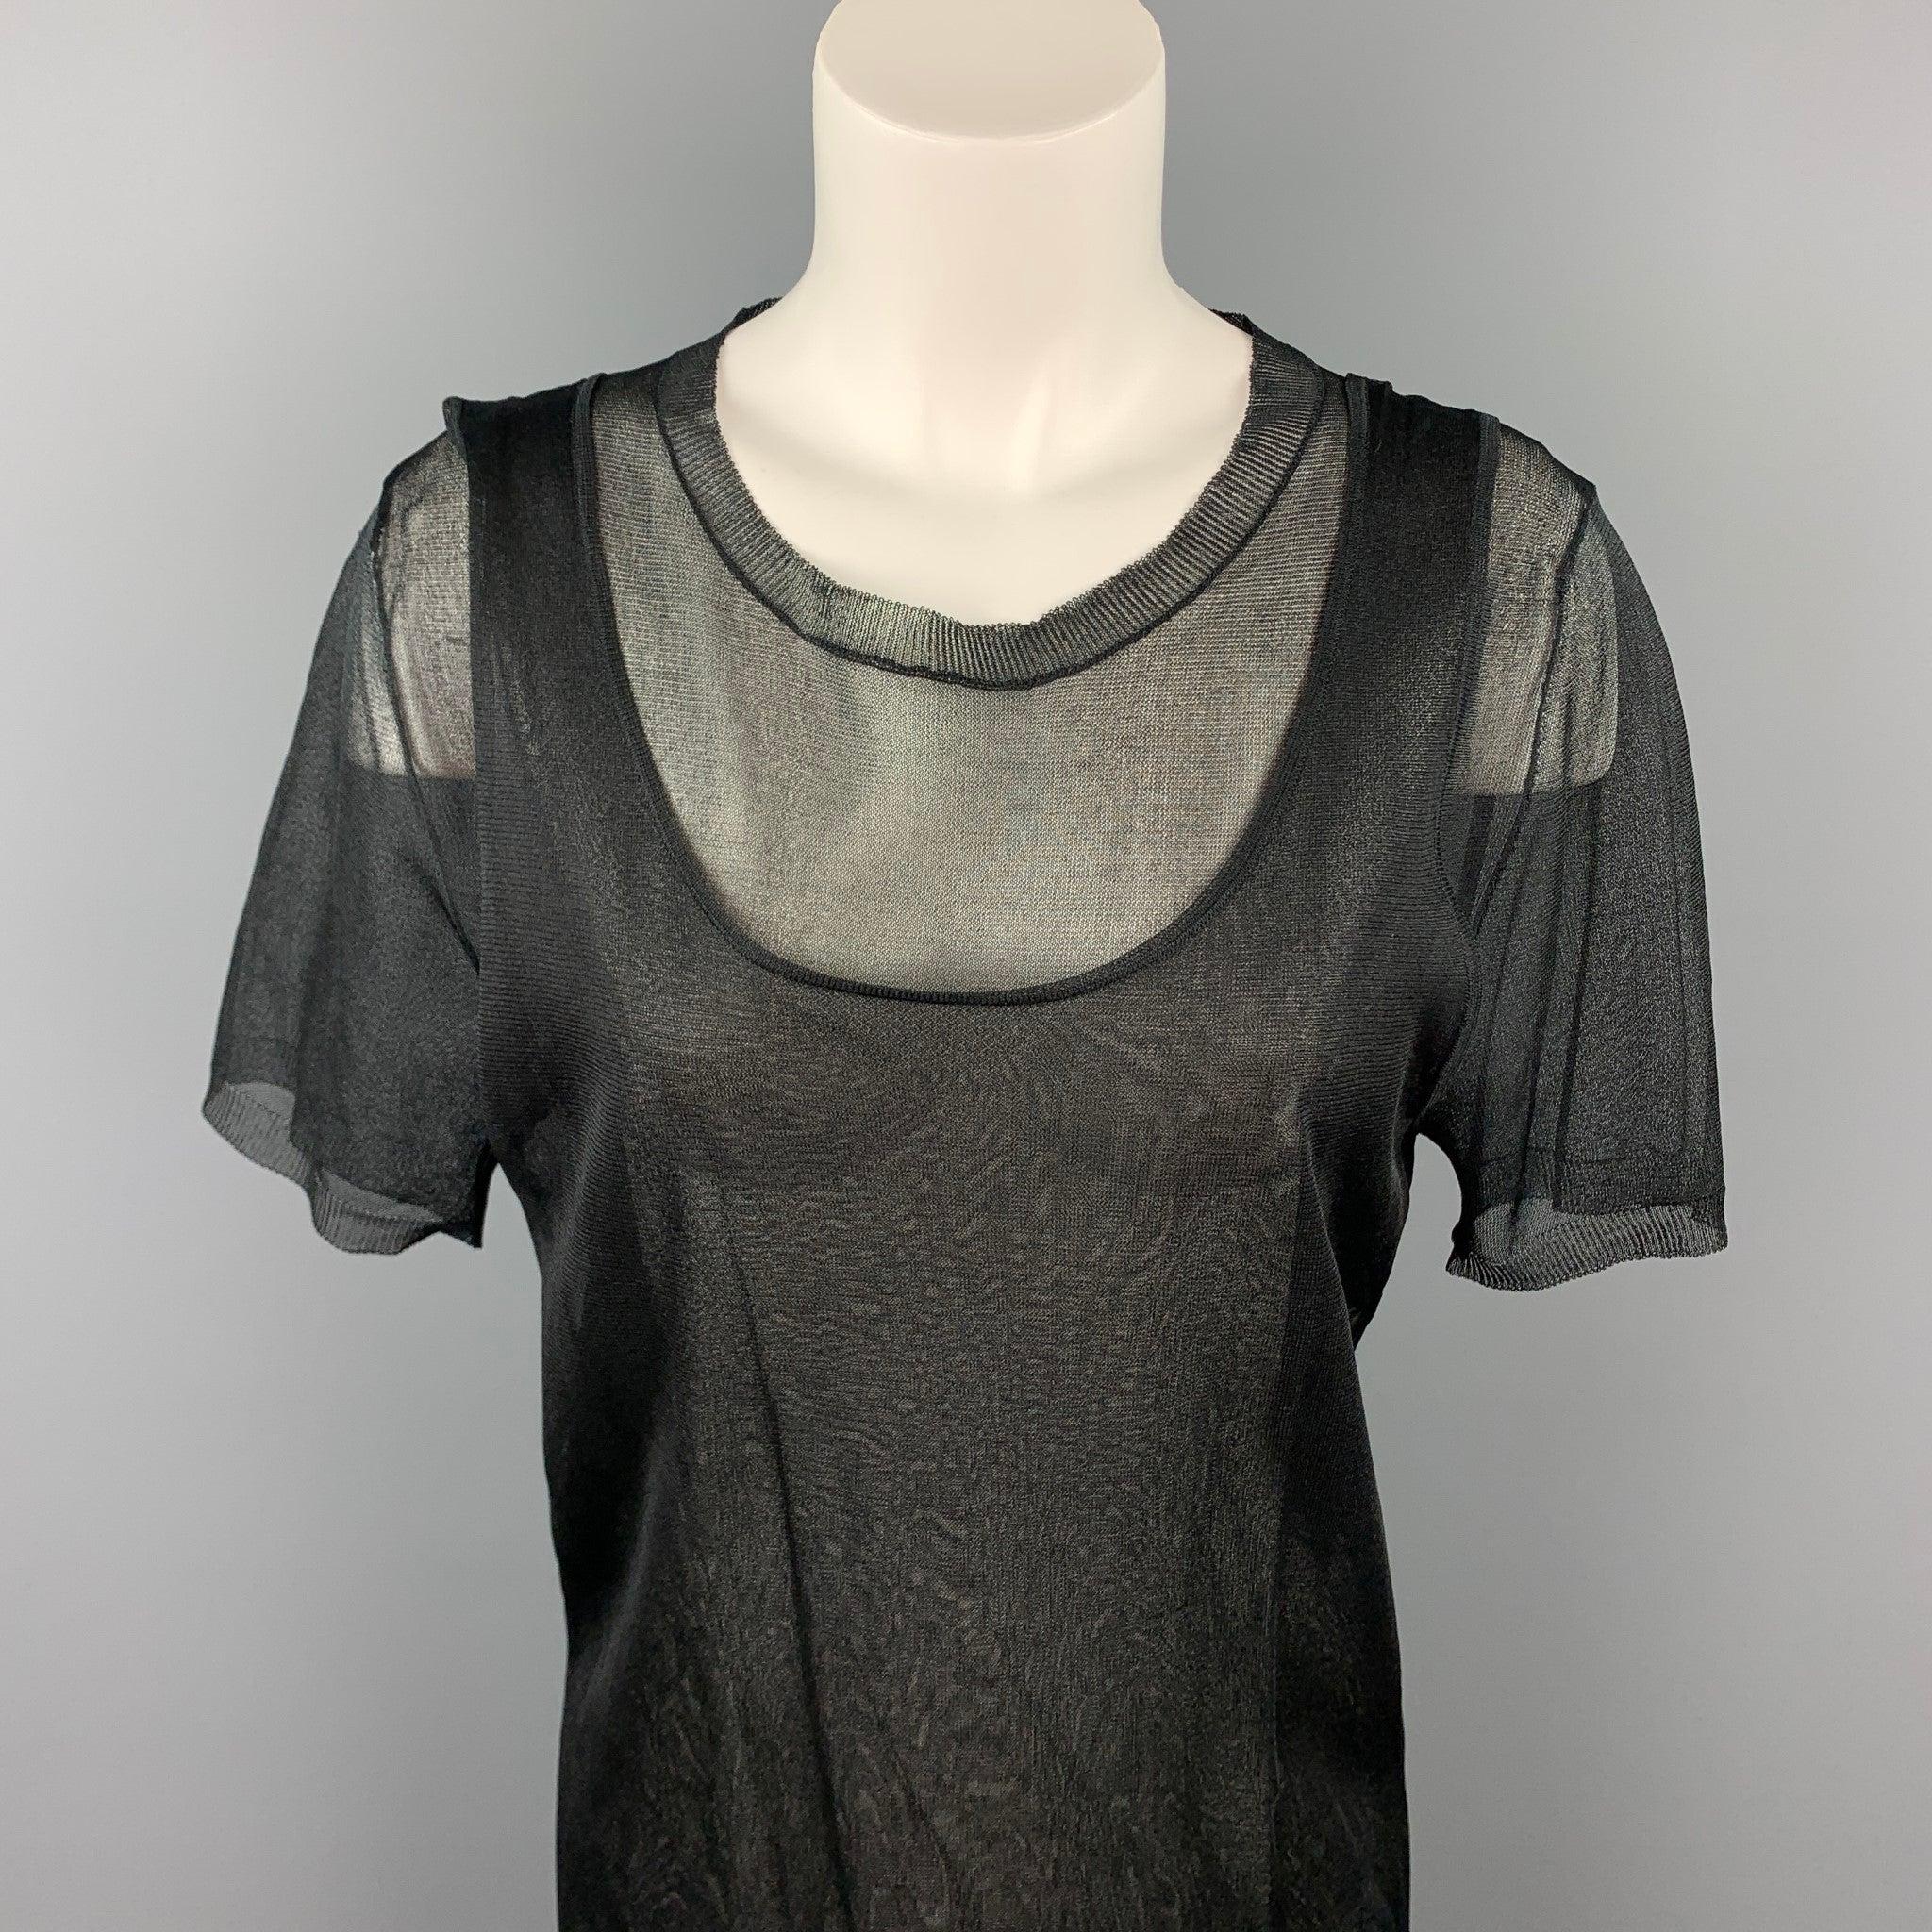 MARNI casual top comes in a black see through silk featuring a layered tank style and a crew-neck. Made in Italy.Excellent Pre-Owned Condition w/ Tags
 

Marked:   IT 42 

Measurements: 
 
Shoulder: 16.5 inches  Bust: 36 inches  Sleeve: 10.5 inches 